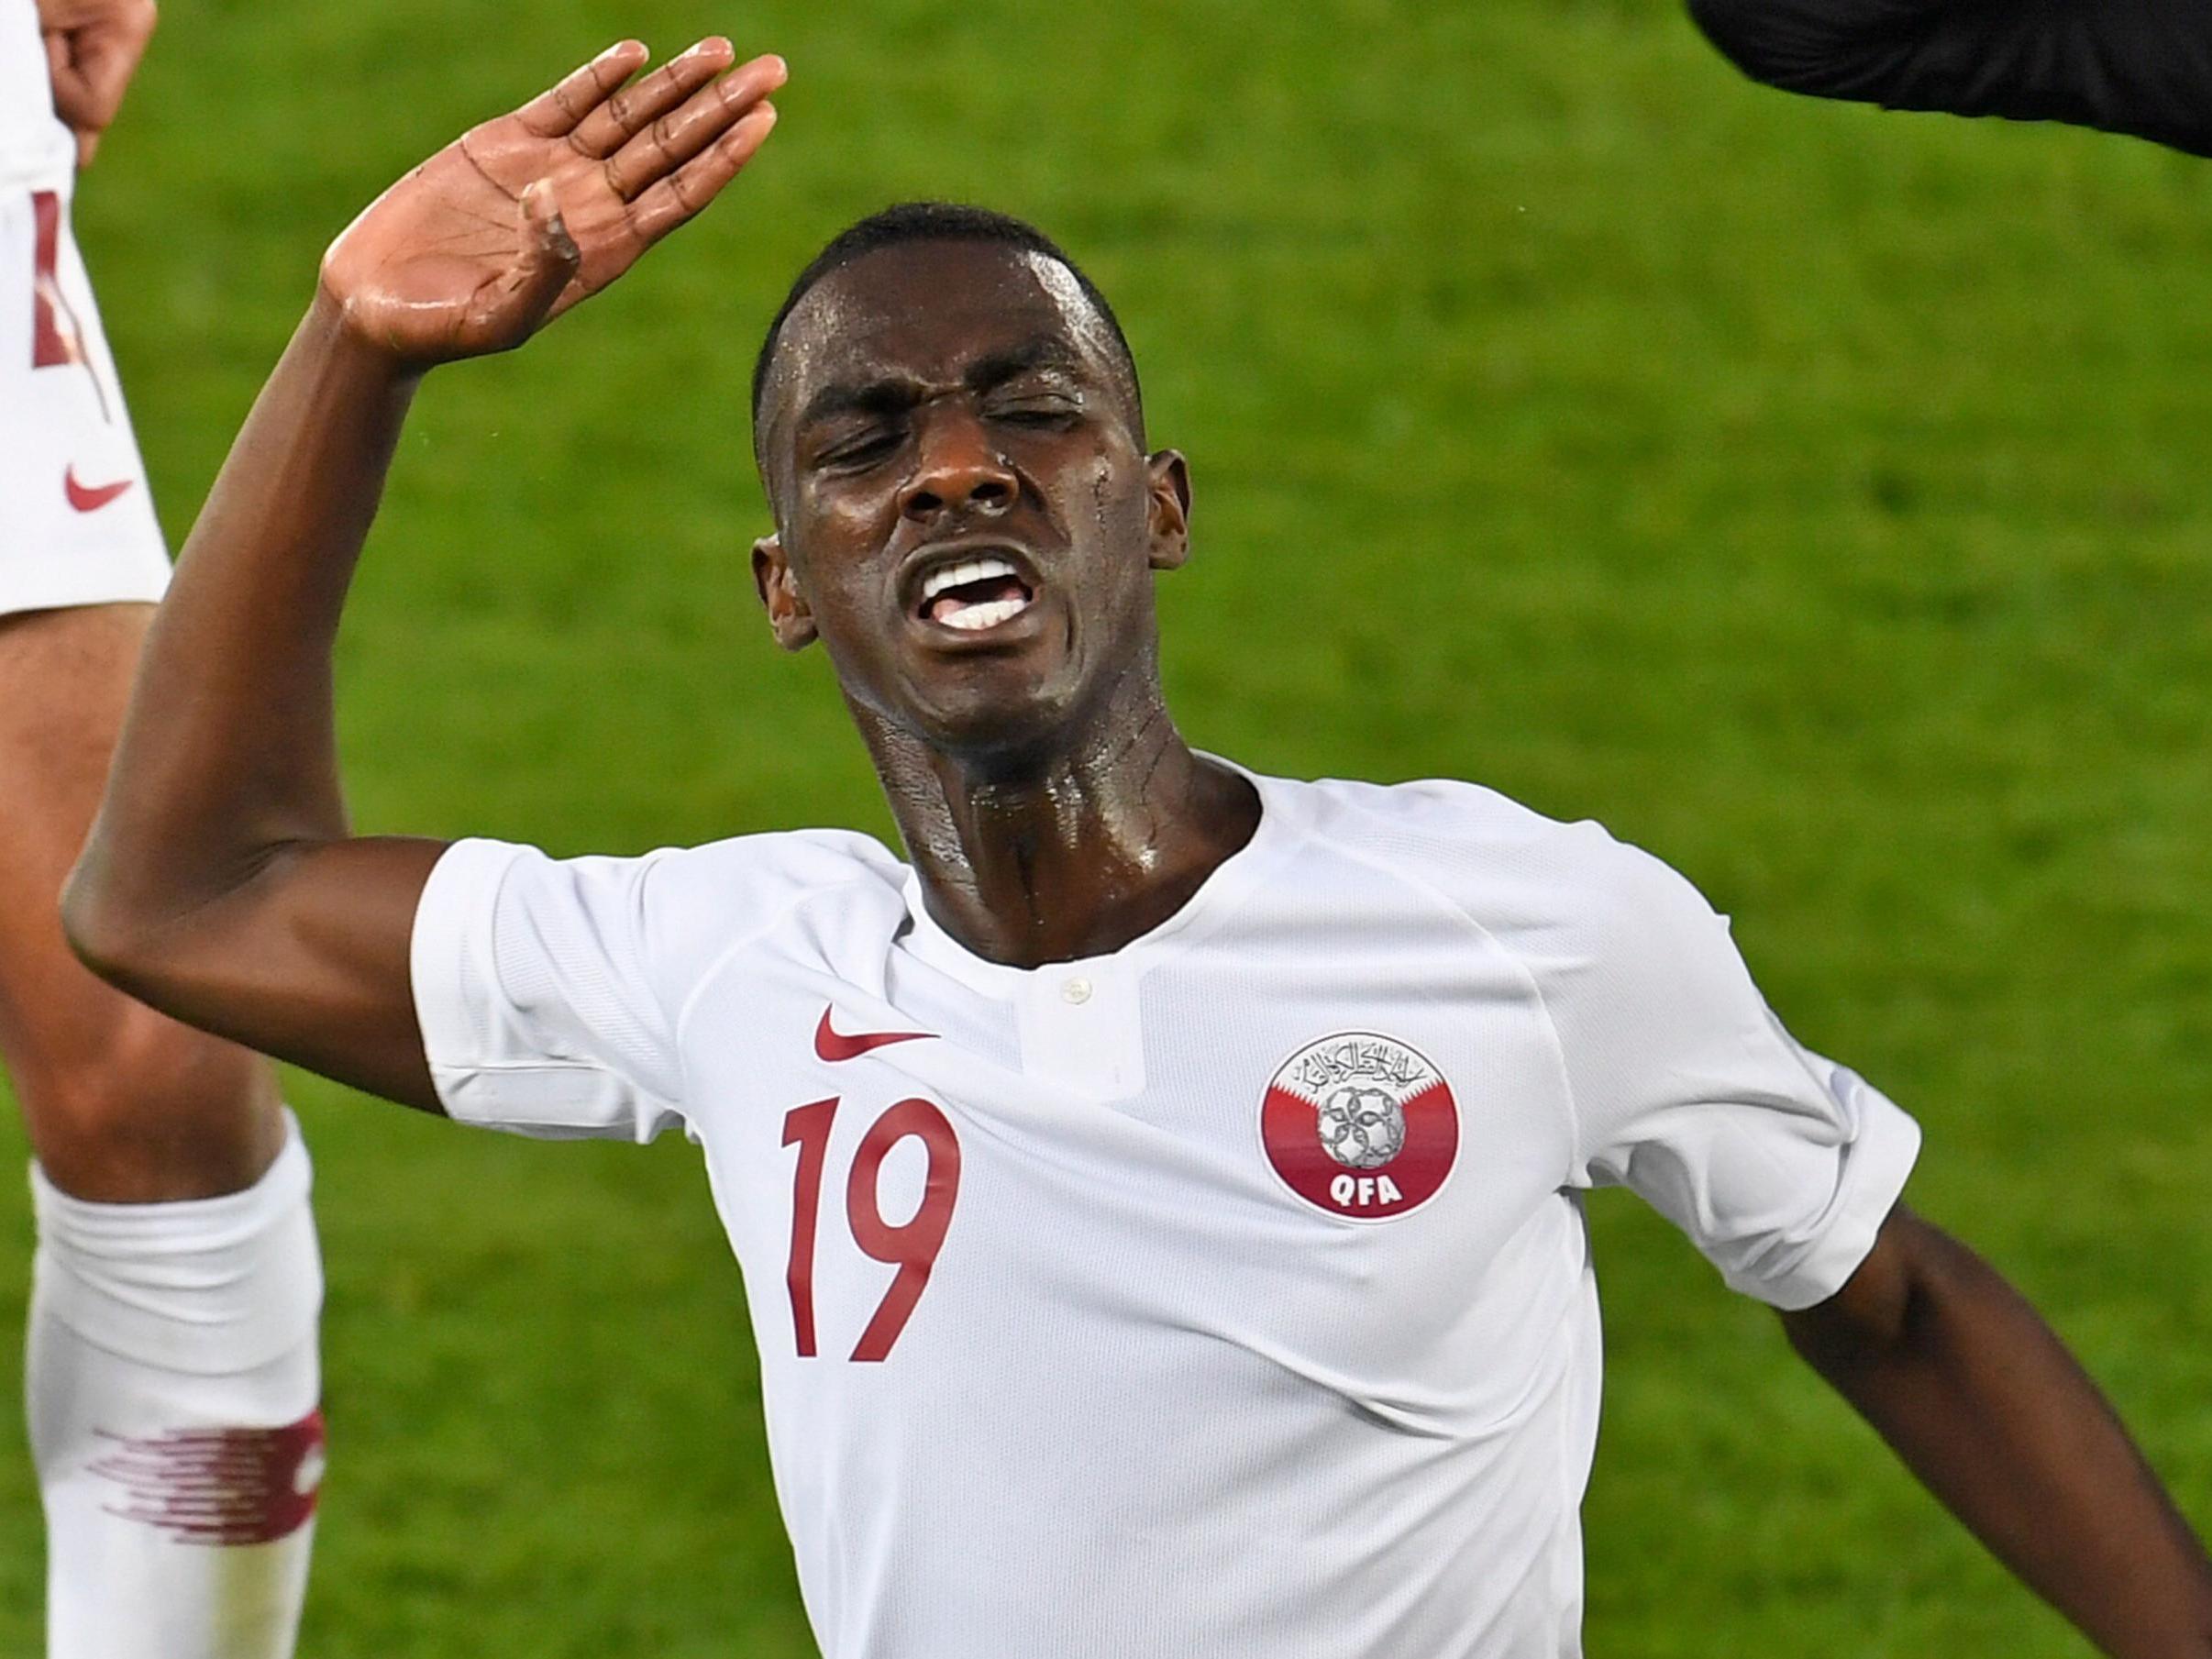 Almoez Ali celebrates his goal in the final (AFP/Getty )